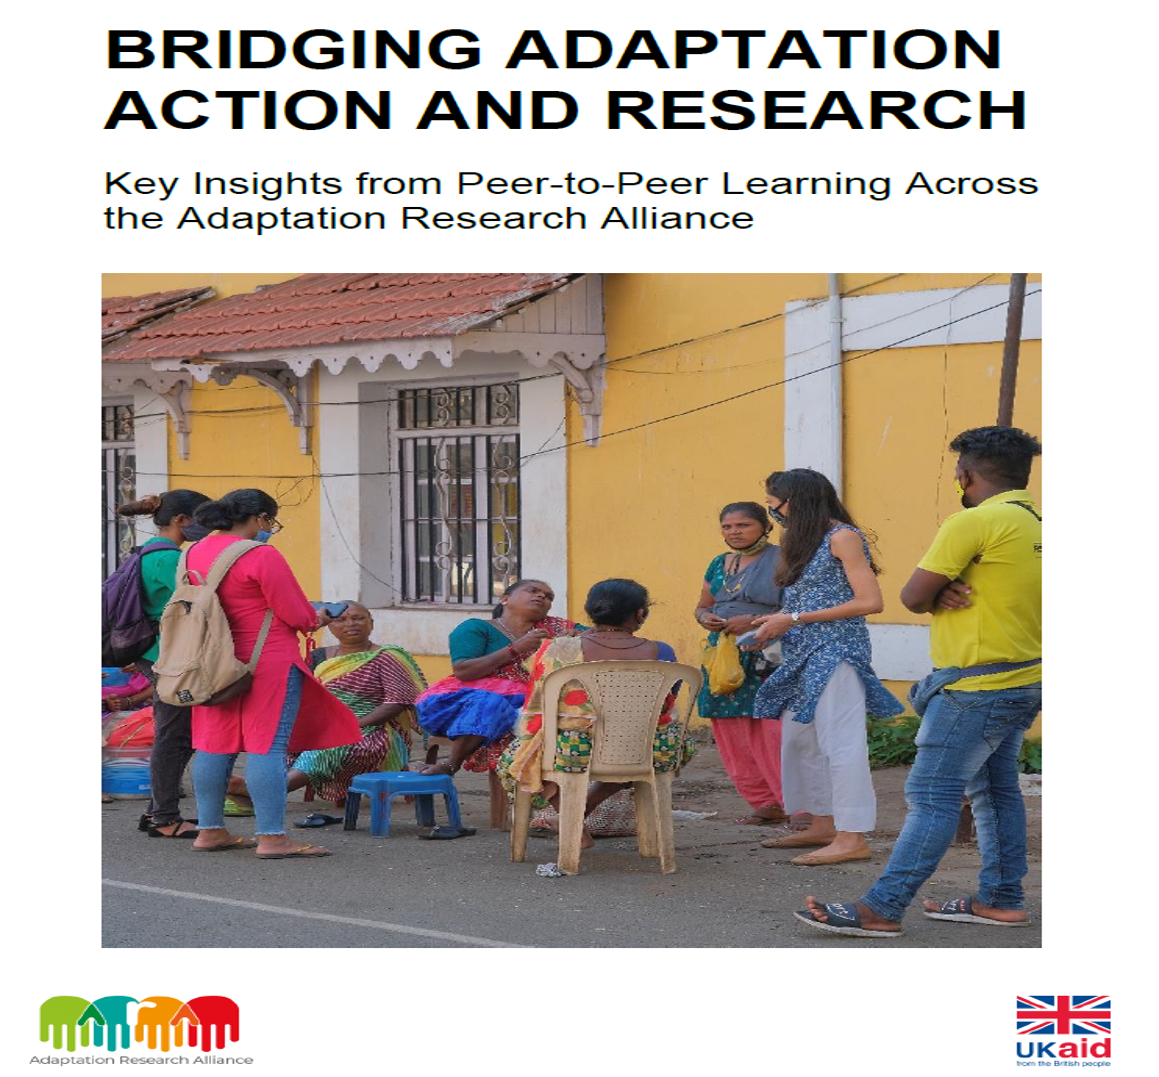 Bridging Action and Research to Develop and Apply Graded Building Codes to Make Them Relevant for Affordable Housing Programs – Aprajita Singh And Bijal Brahmbhatt